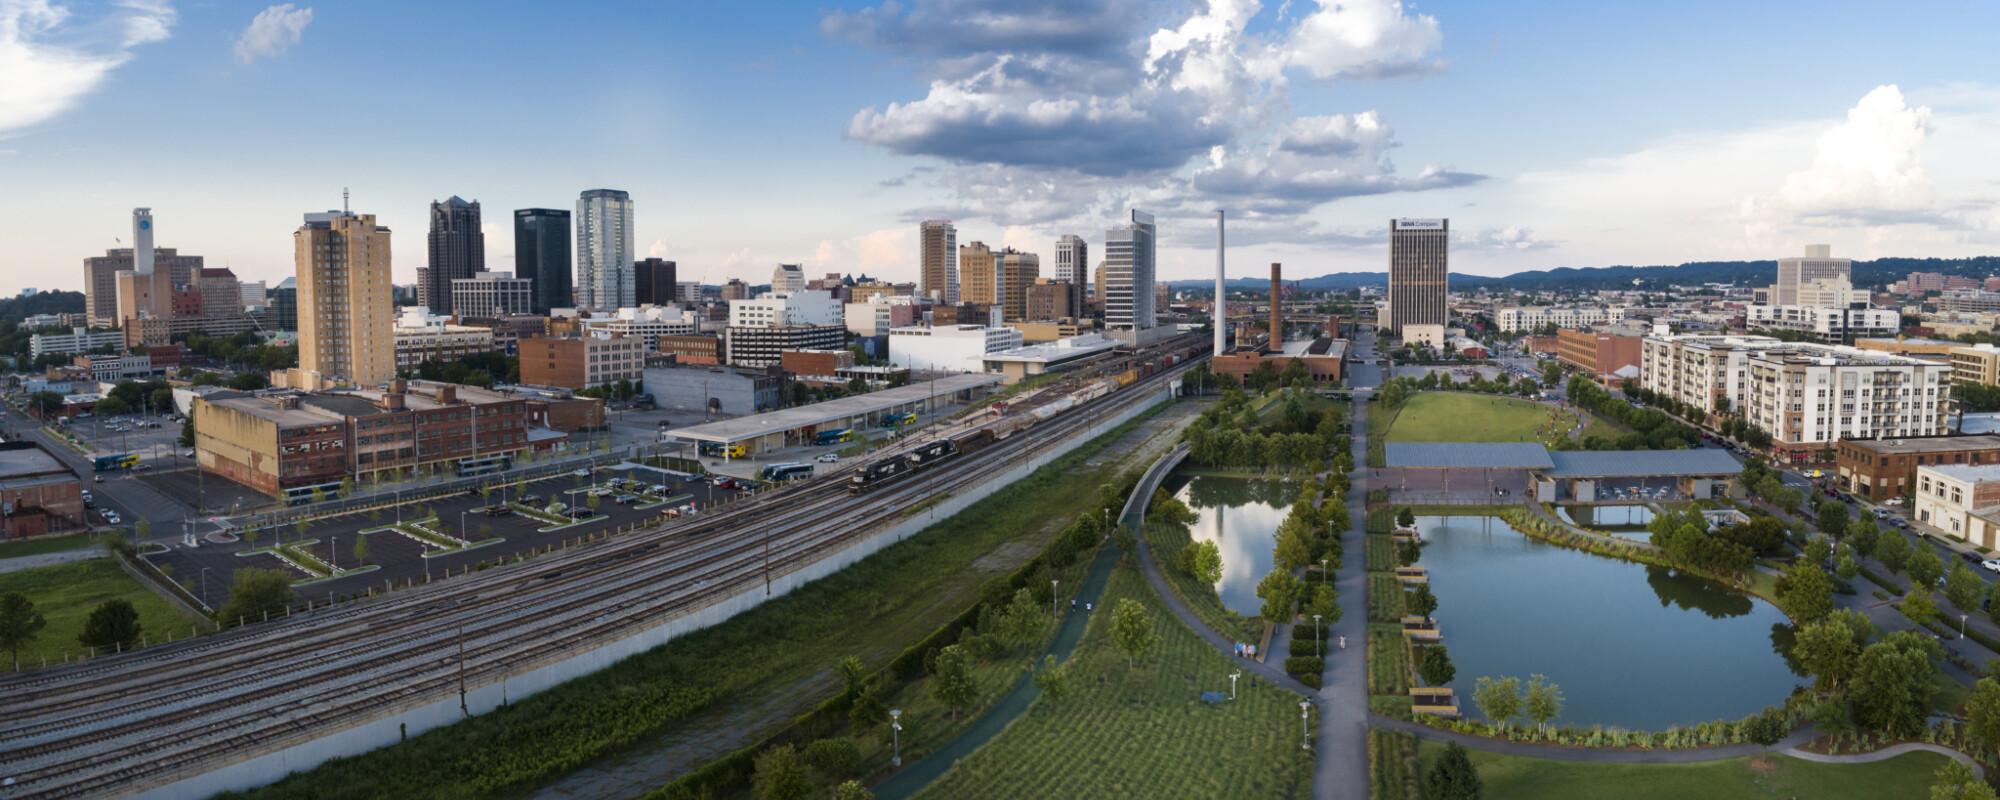 Aerial of a city skyline (left) and large park (right) divided by railroad tracks.